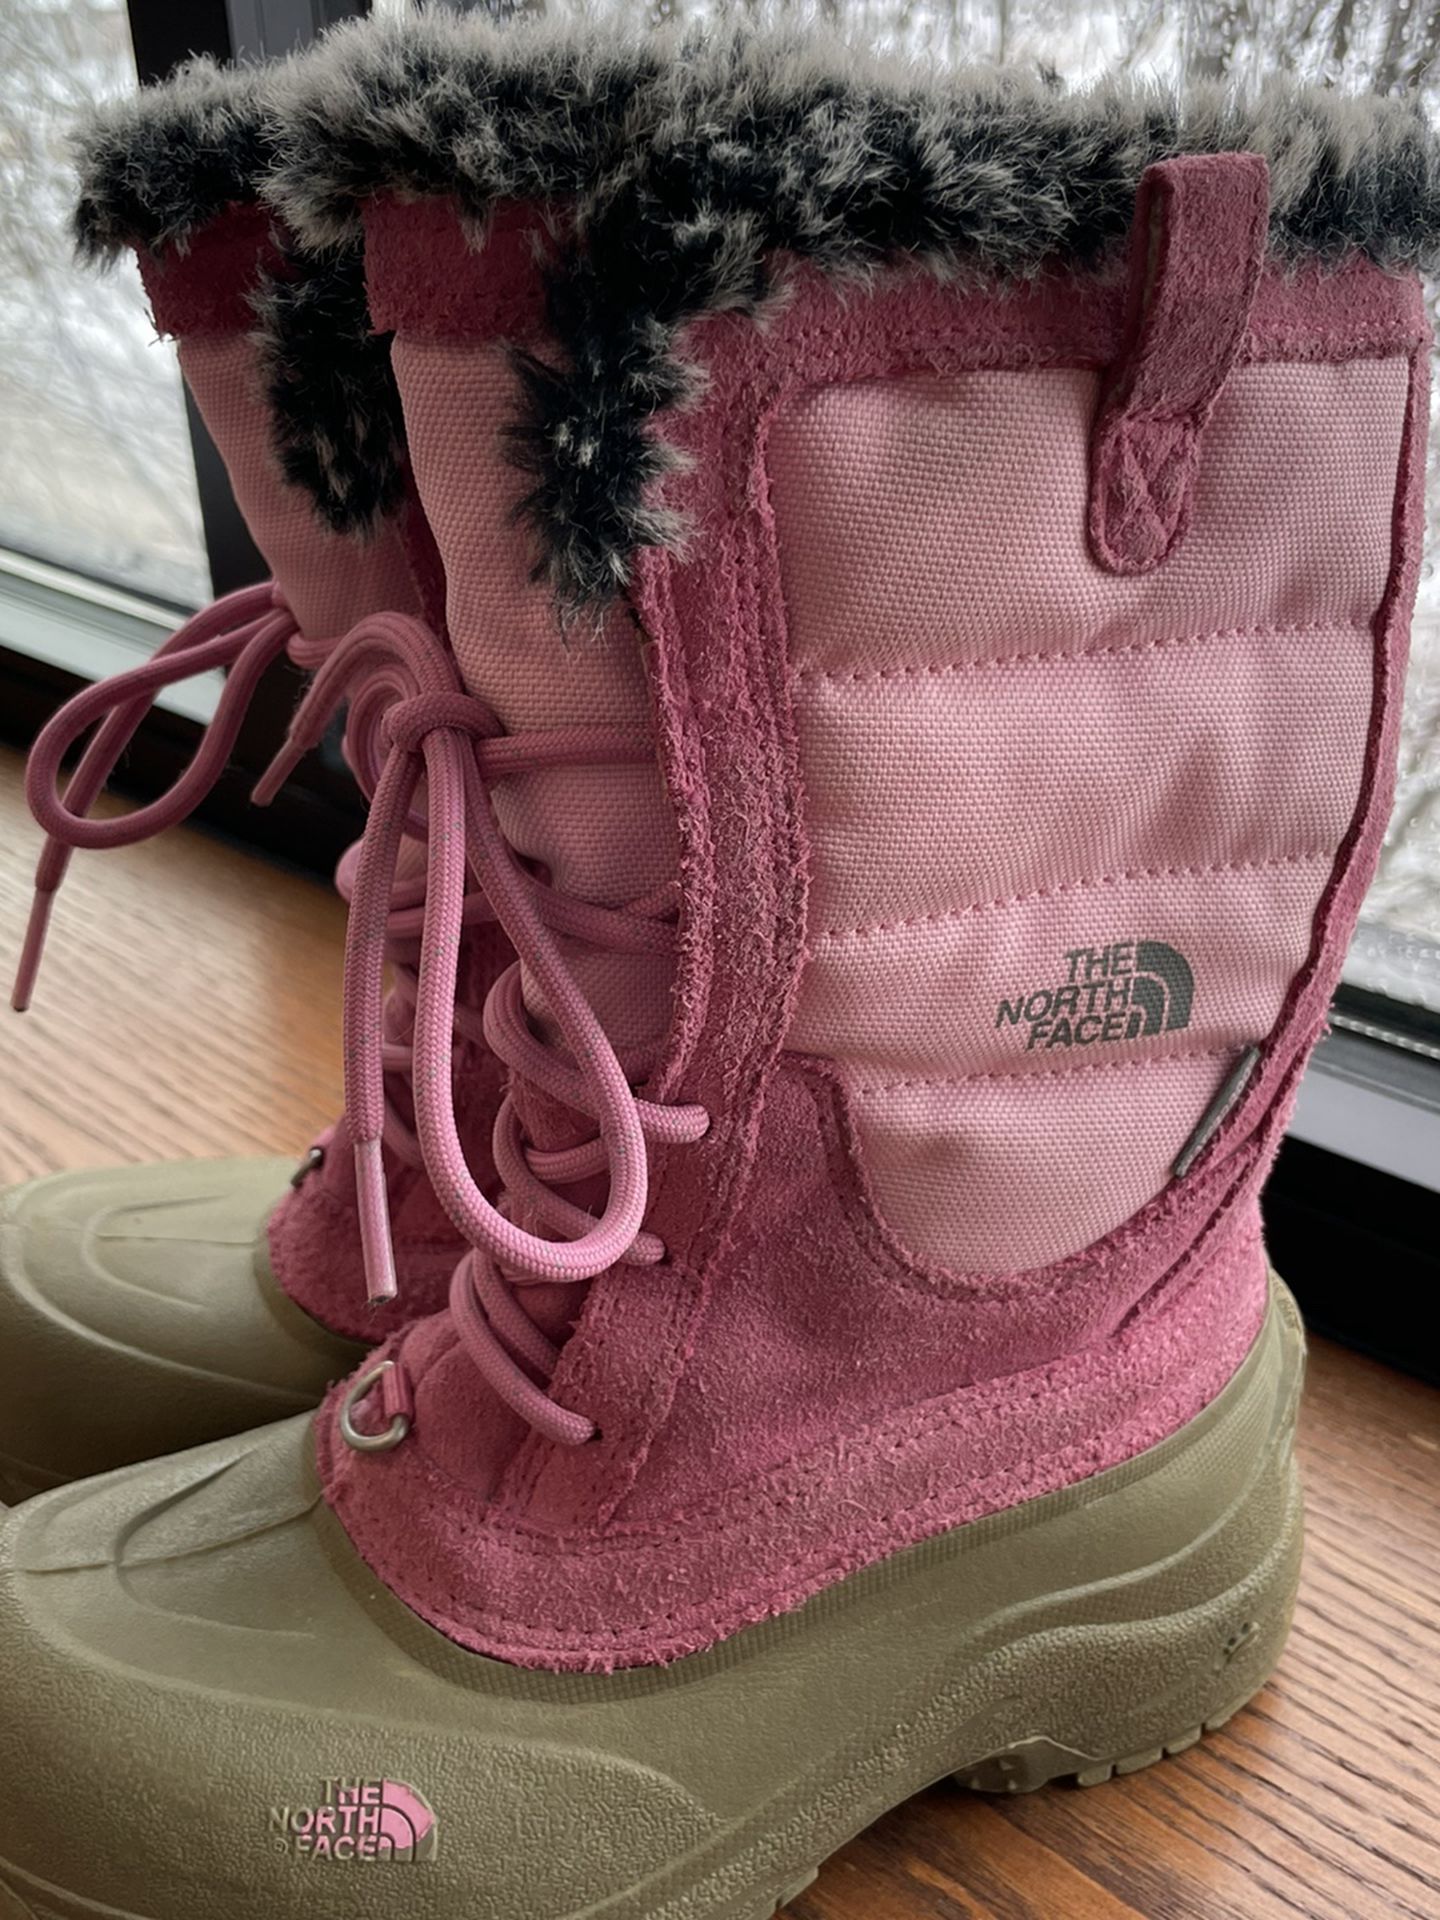 The North Face girl’s size 2 snow boots